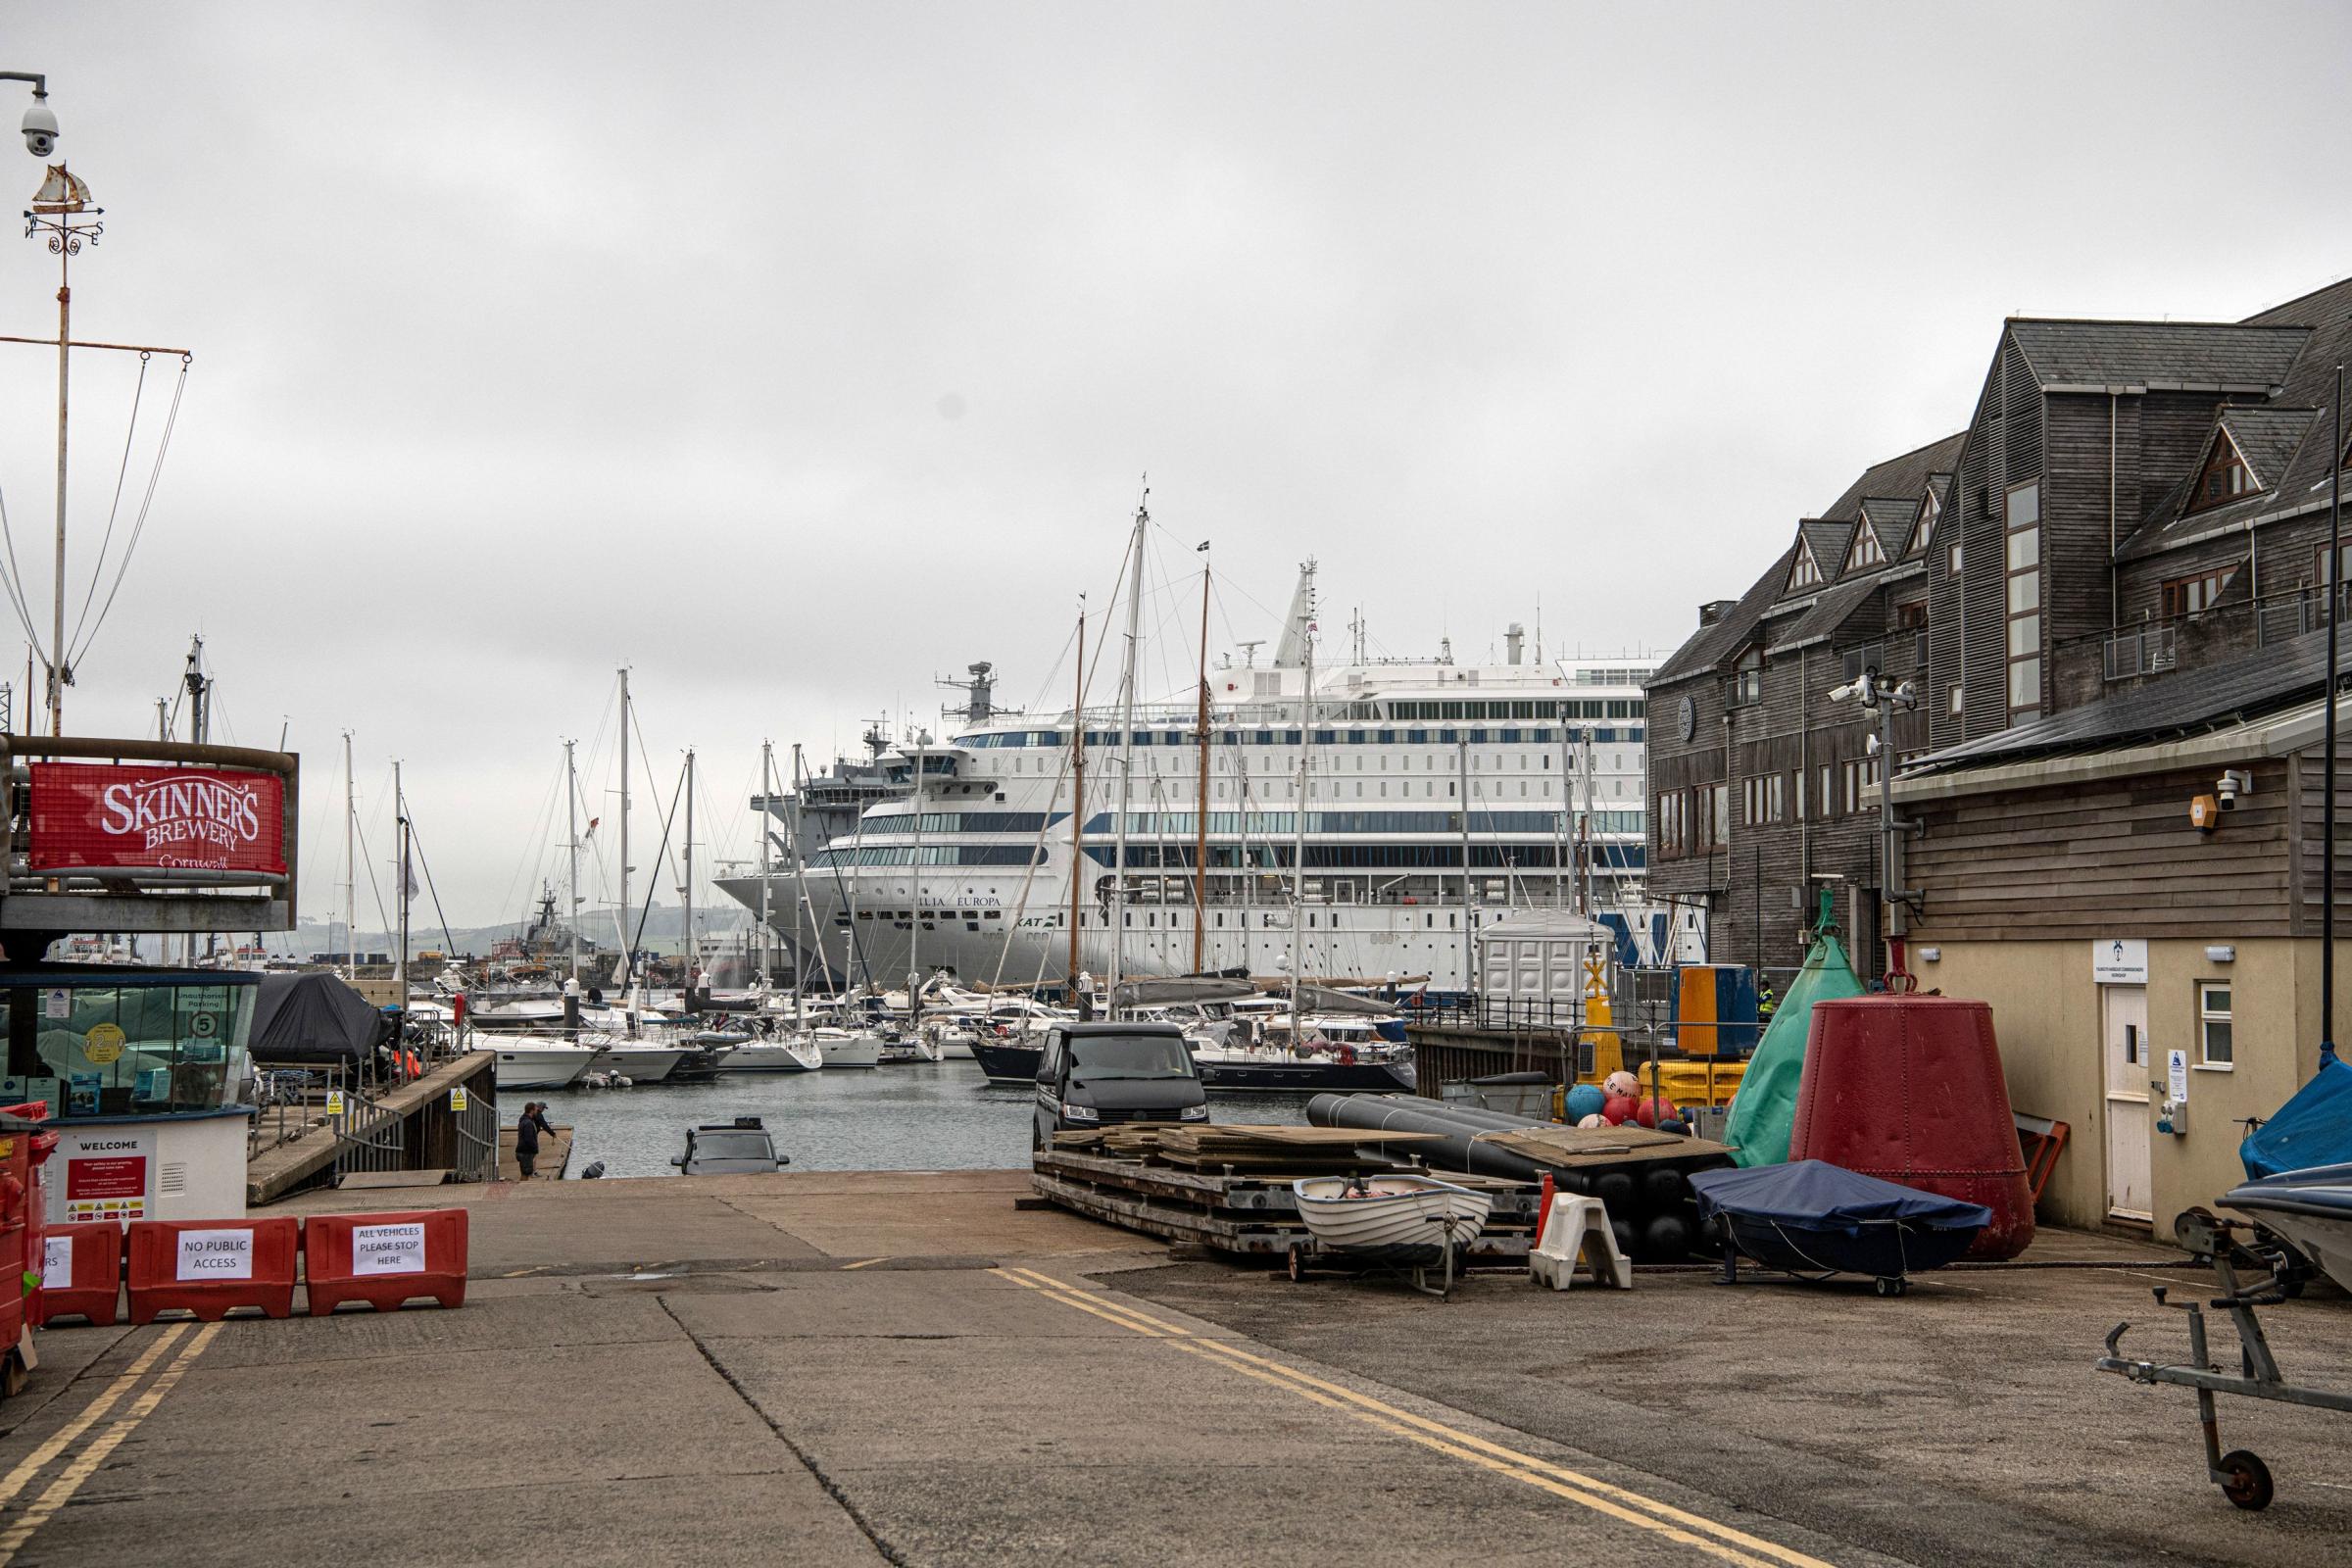 The ferry will be moored at Falmouth Docks for ten days